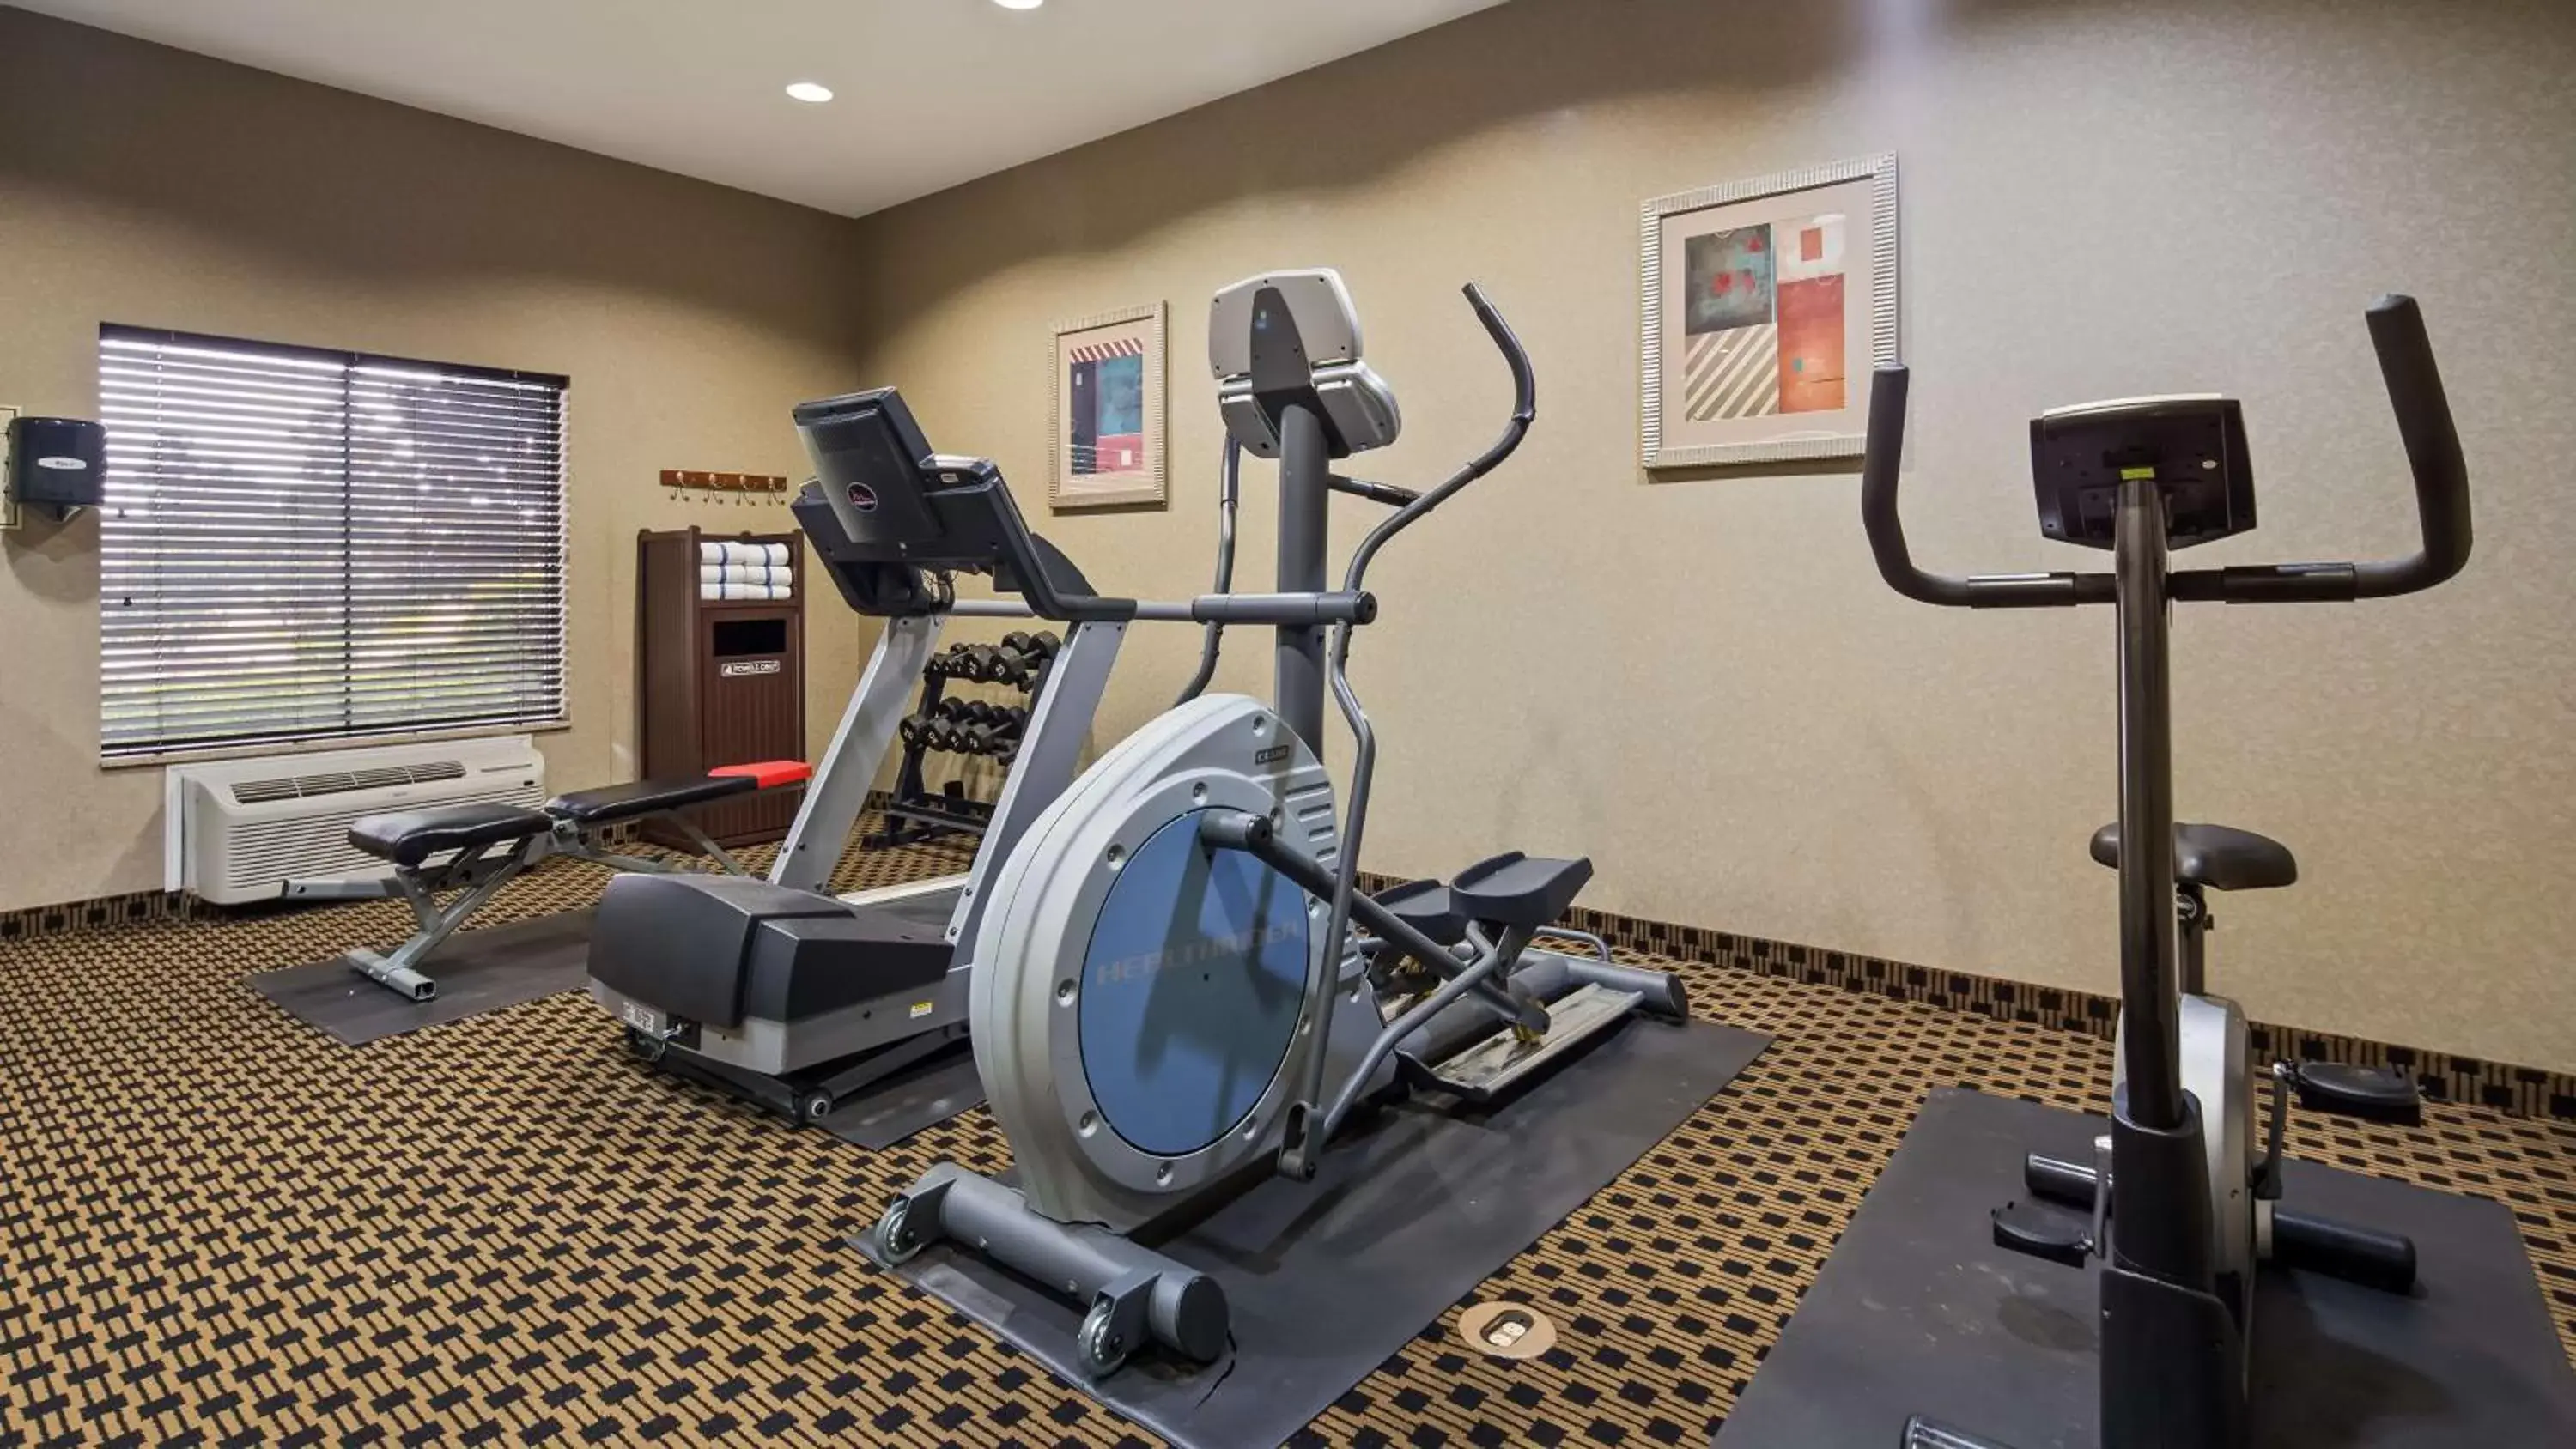 Fitness centre/facilities, Fitness Center/Facilities in Best Western Plus Goodman Inn & Suites